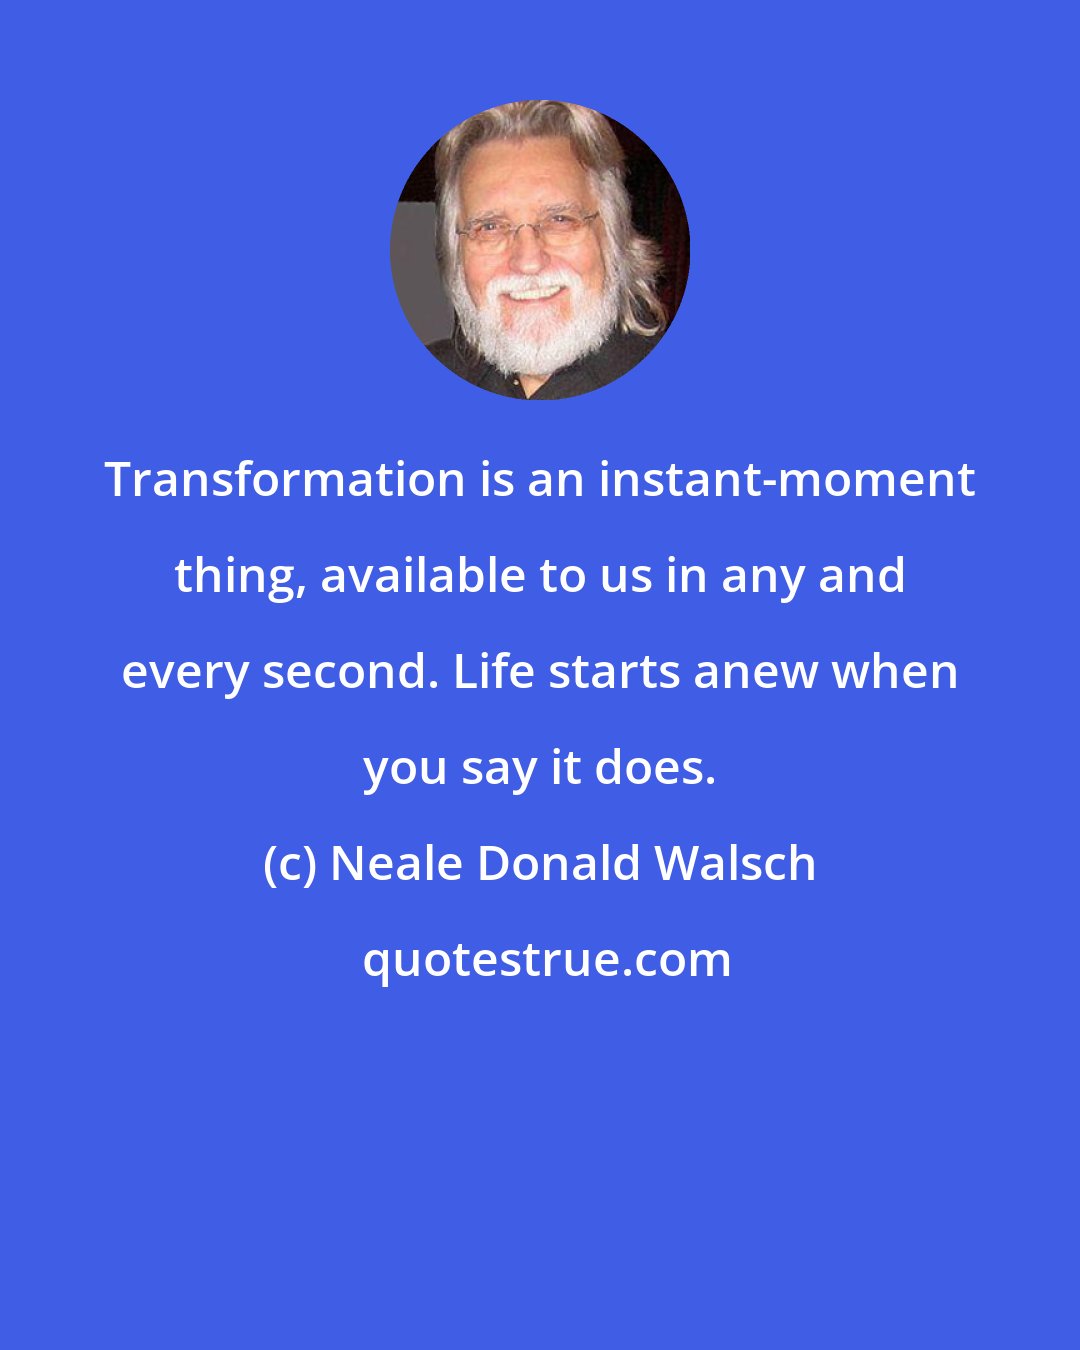 Neale Donald Walsch: Transformation is an instant-moment thing, available to us in any and every second. Life starts anew when you say it does.